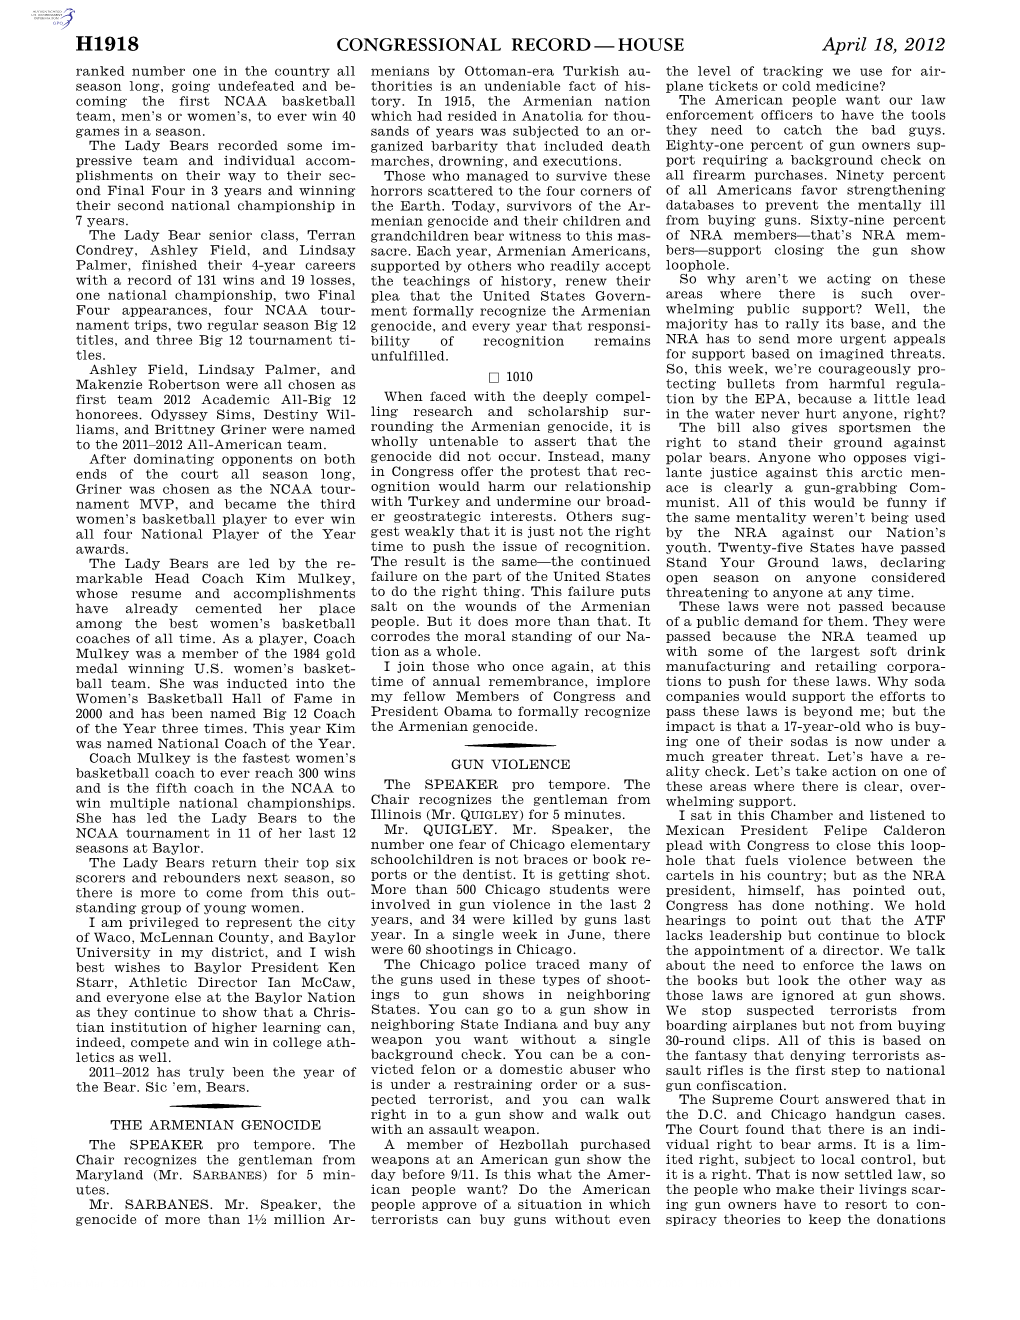 Congressional Record—House H1918